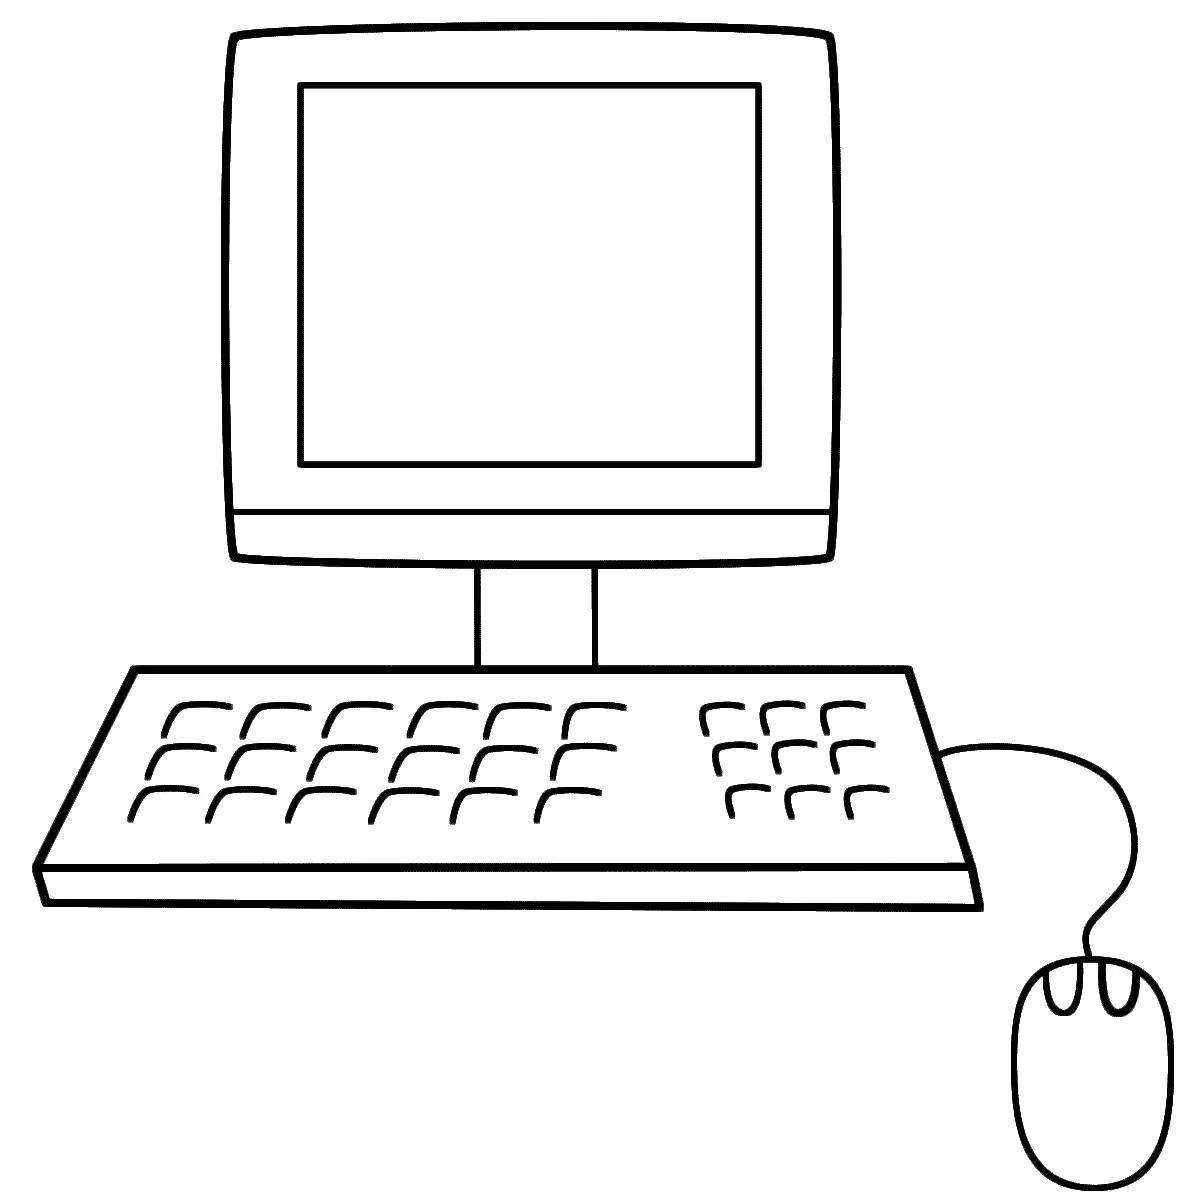 Color-frenzy computer mouse coloring page